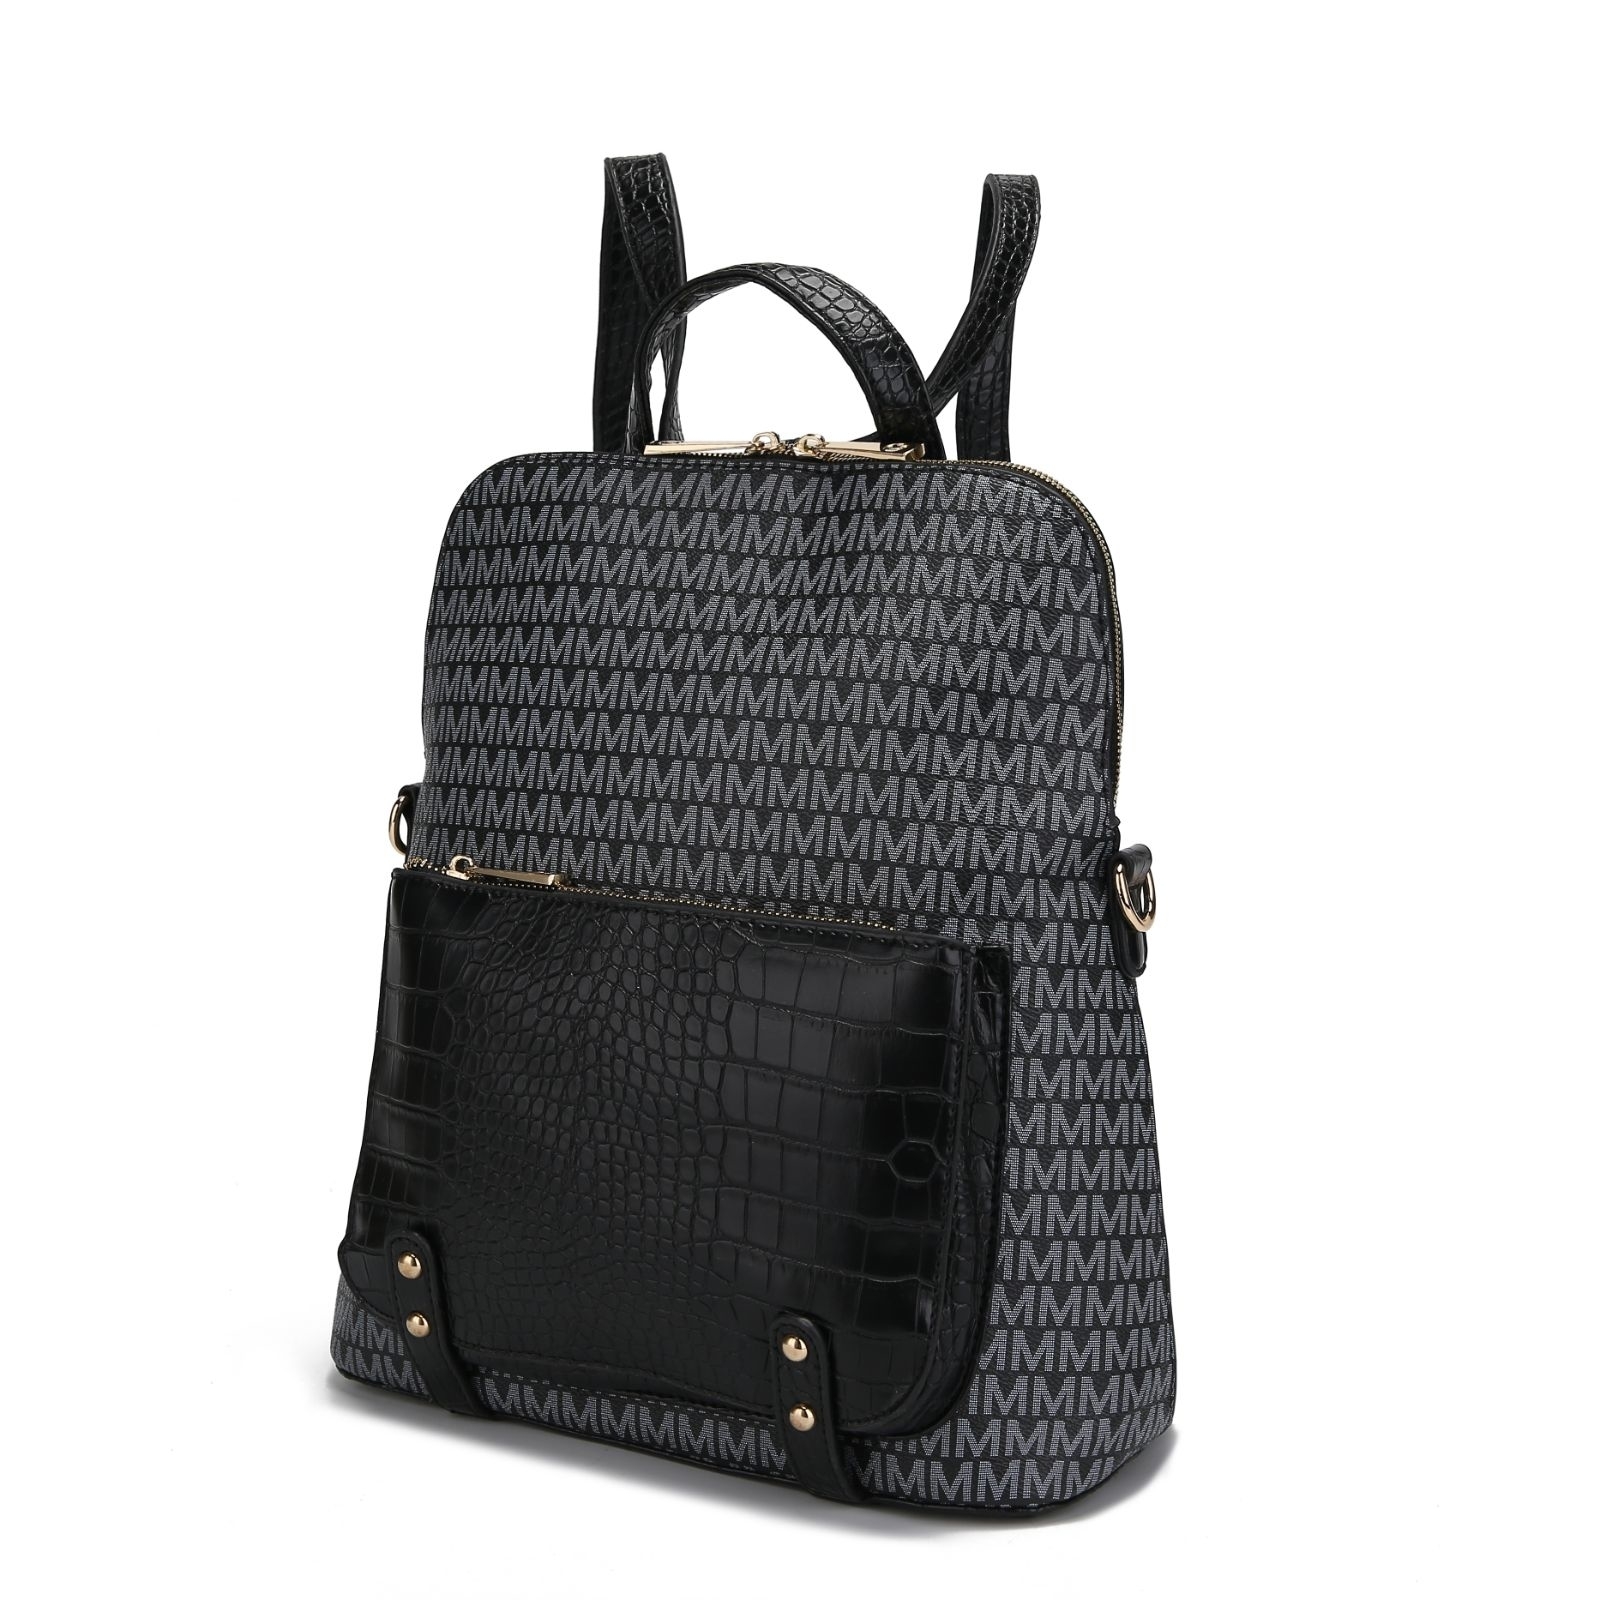 Mia K. Collection&nbsp;Rede Signature Backpack - image 3 of 10